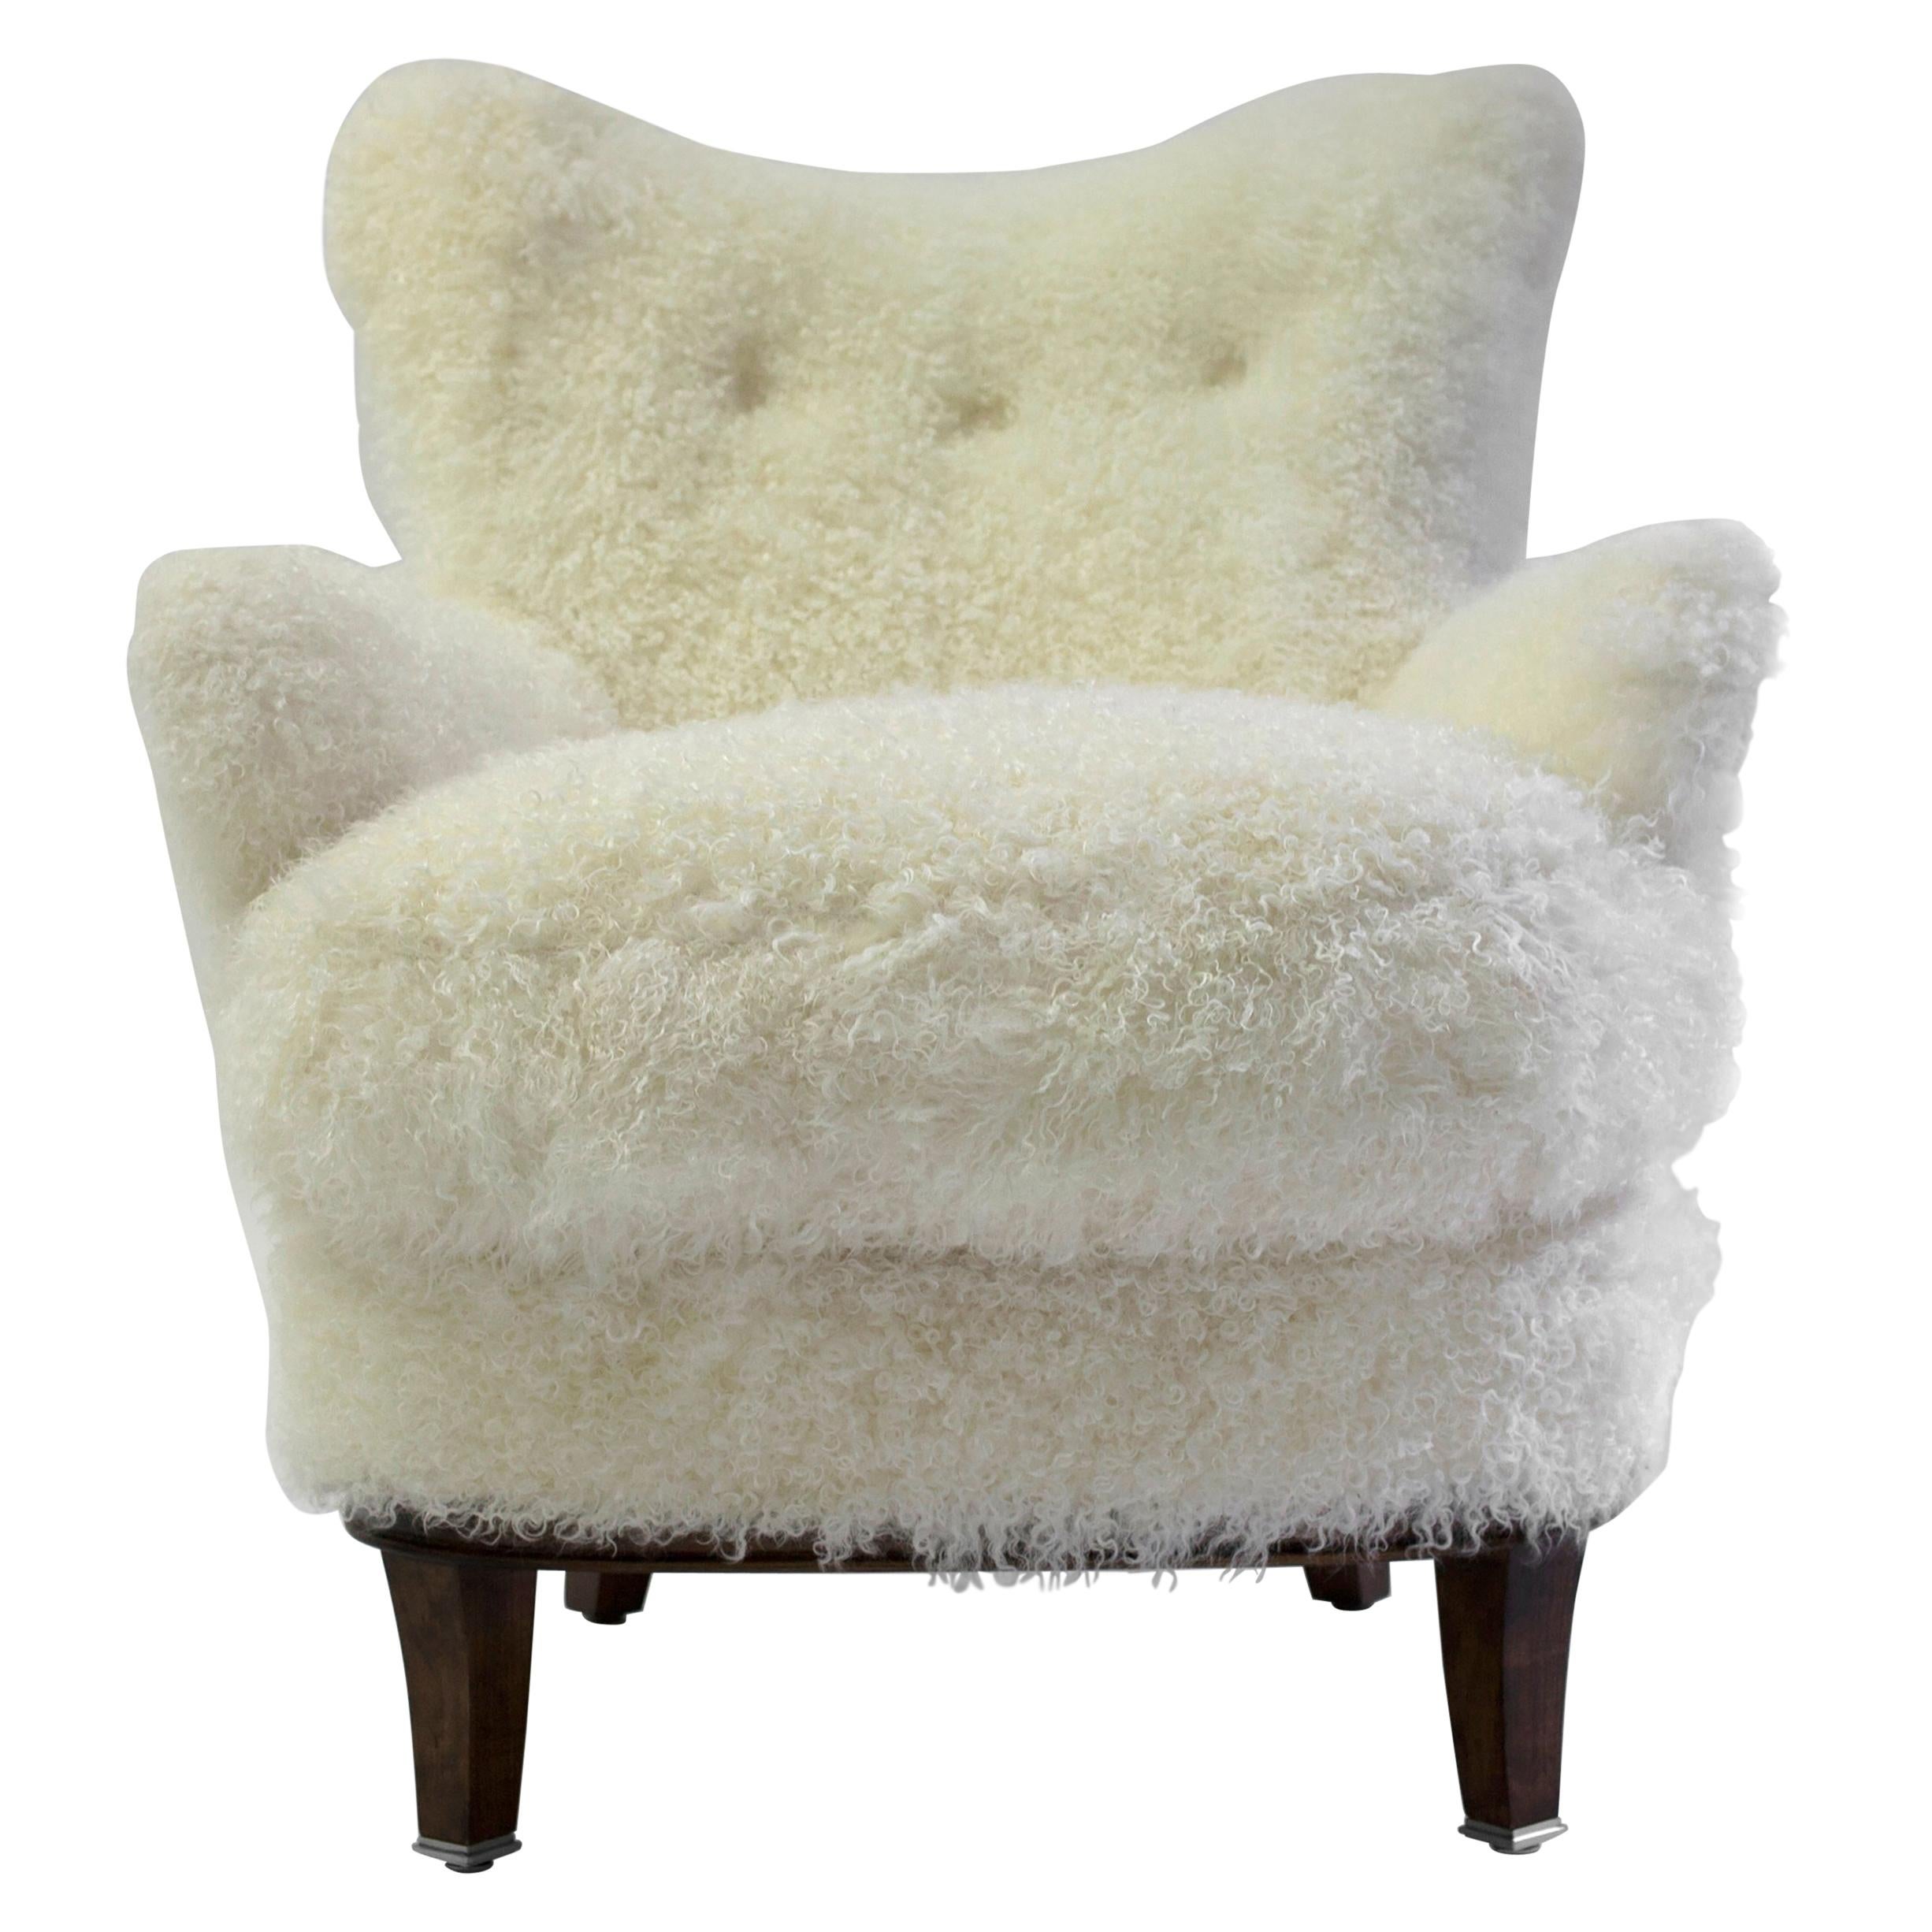 Shearling Covered Shaped Back Chair with Wood Base and Legs with Metal Cap Feet 